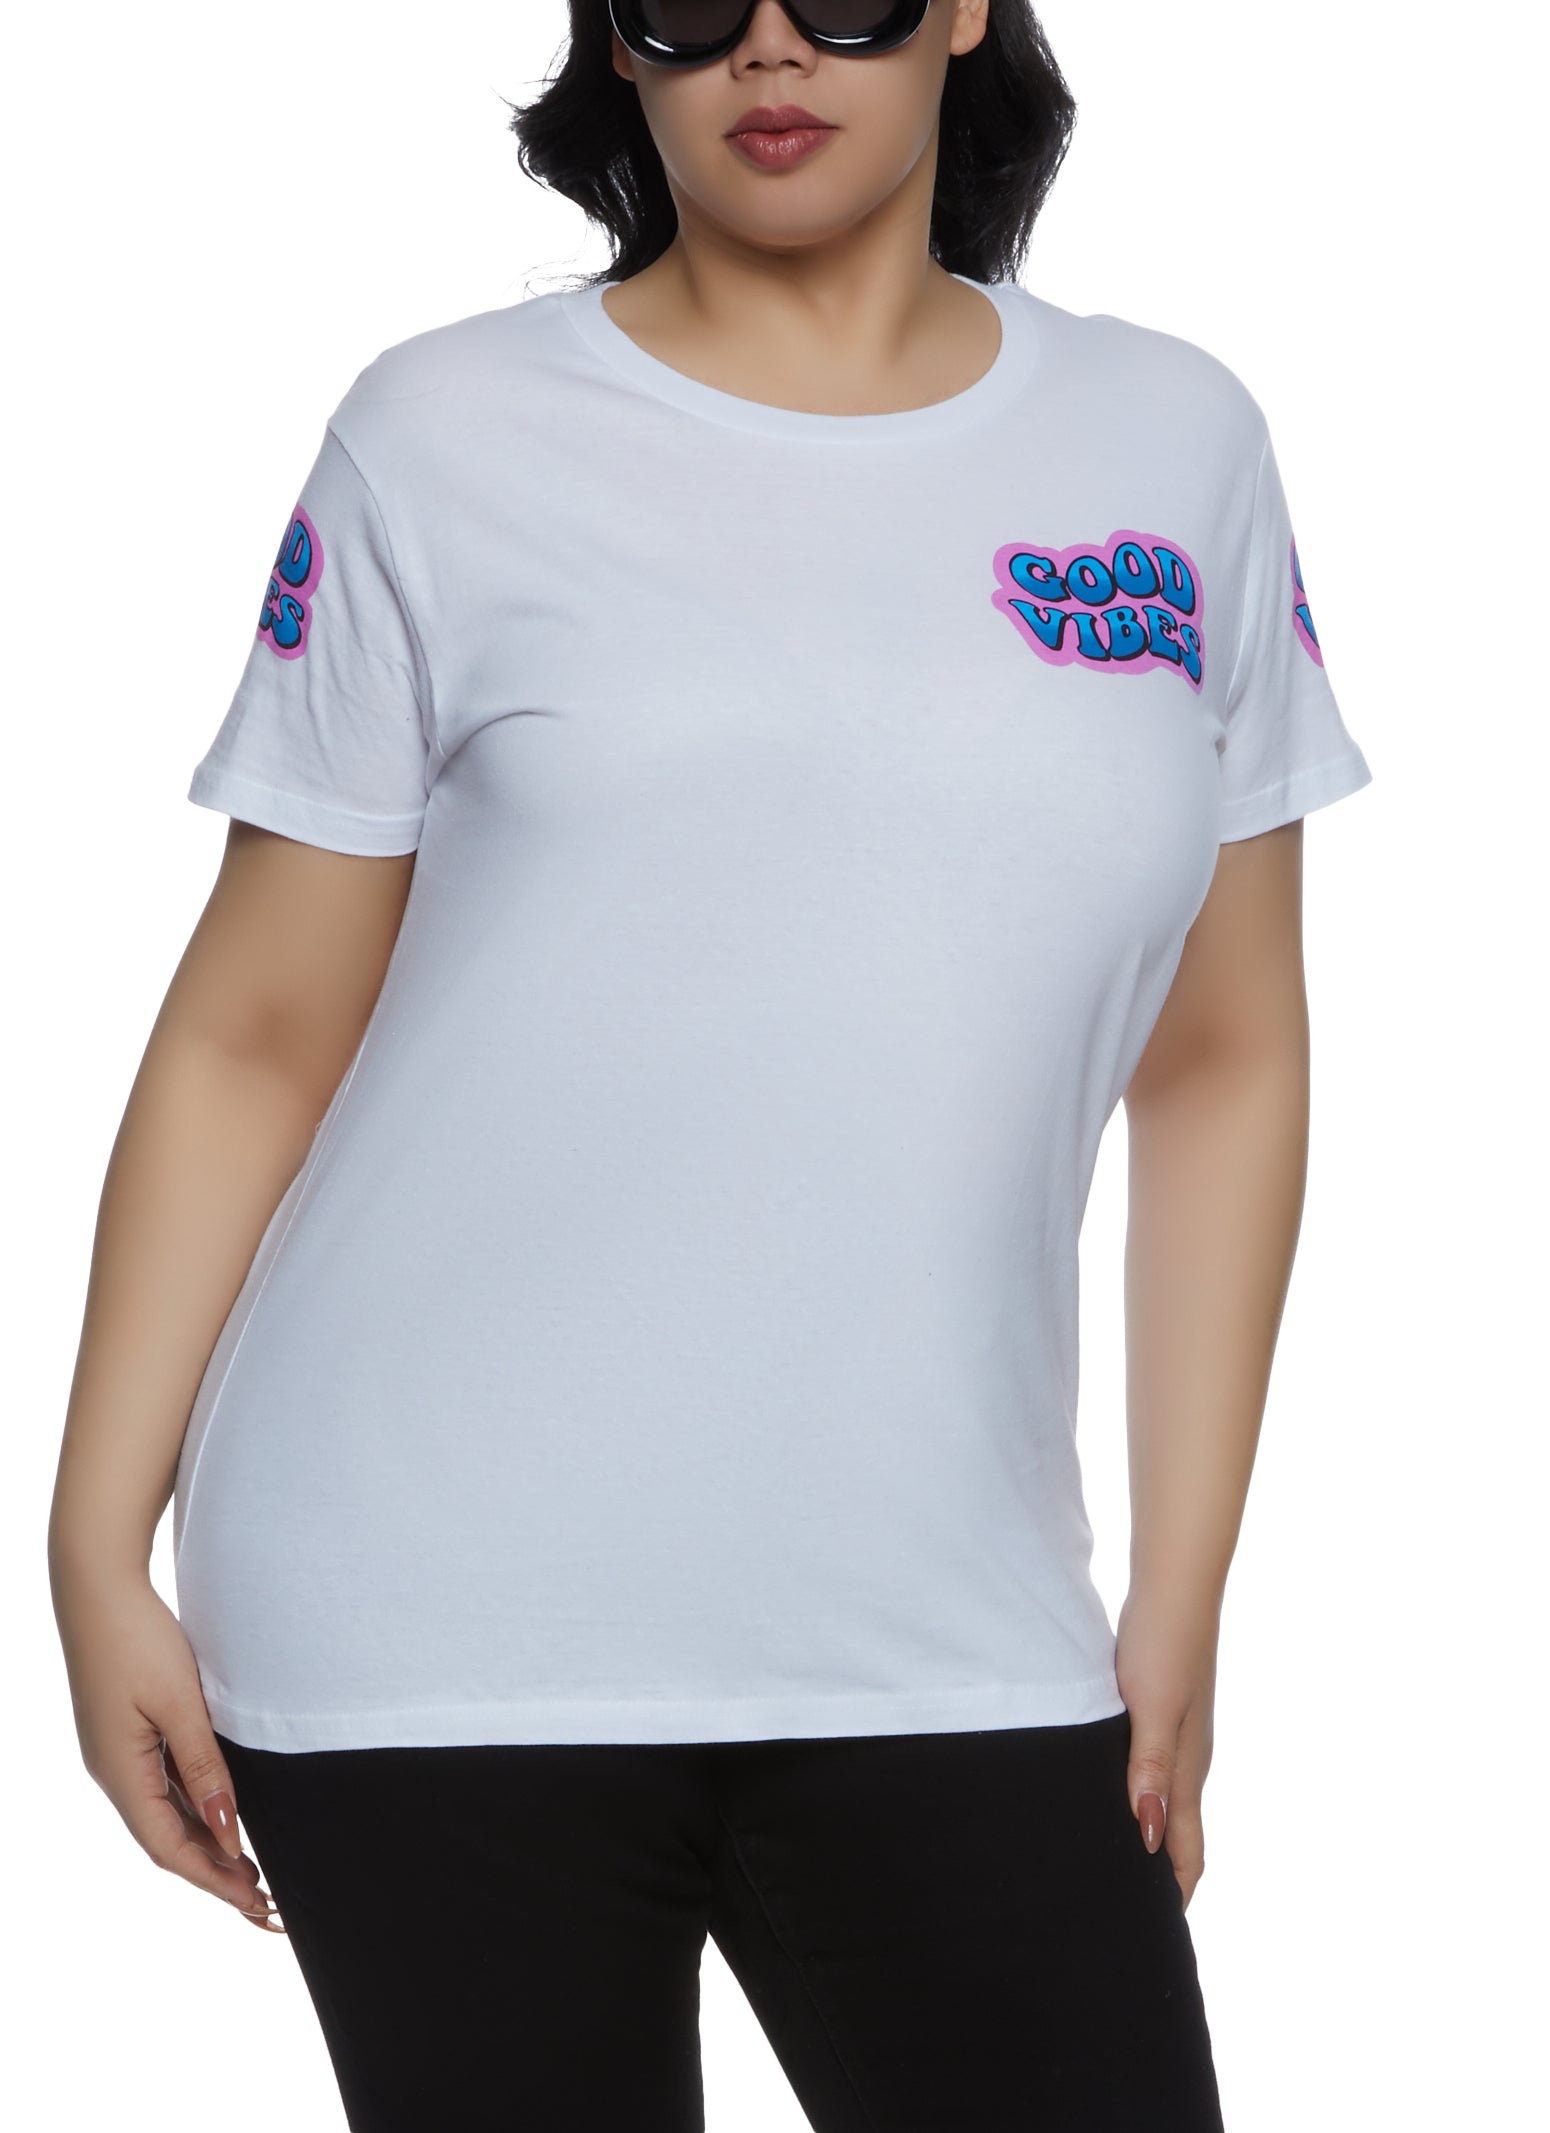 Womens Plus Size Good Vibes Graphic Tee, White, Size 2X